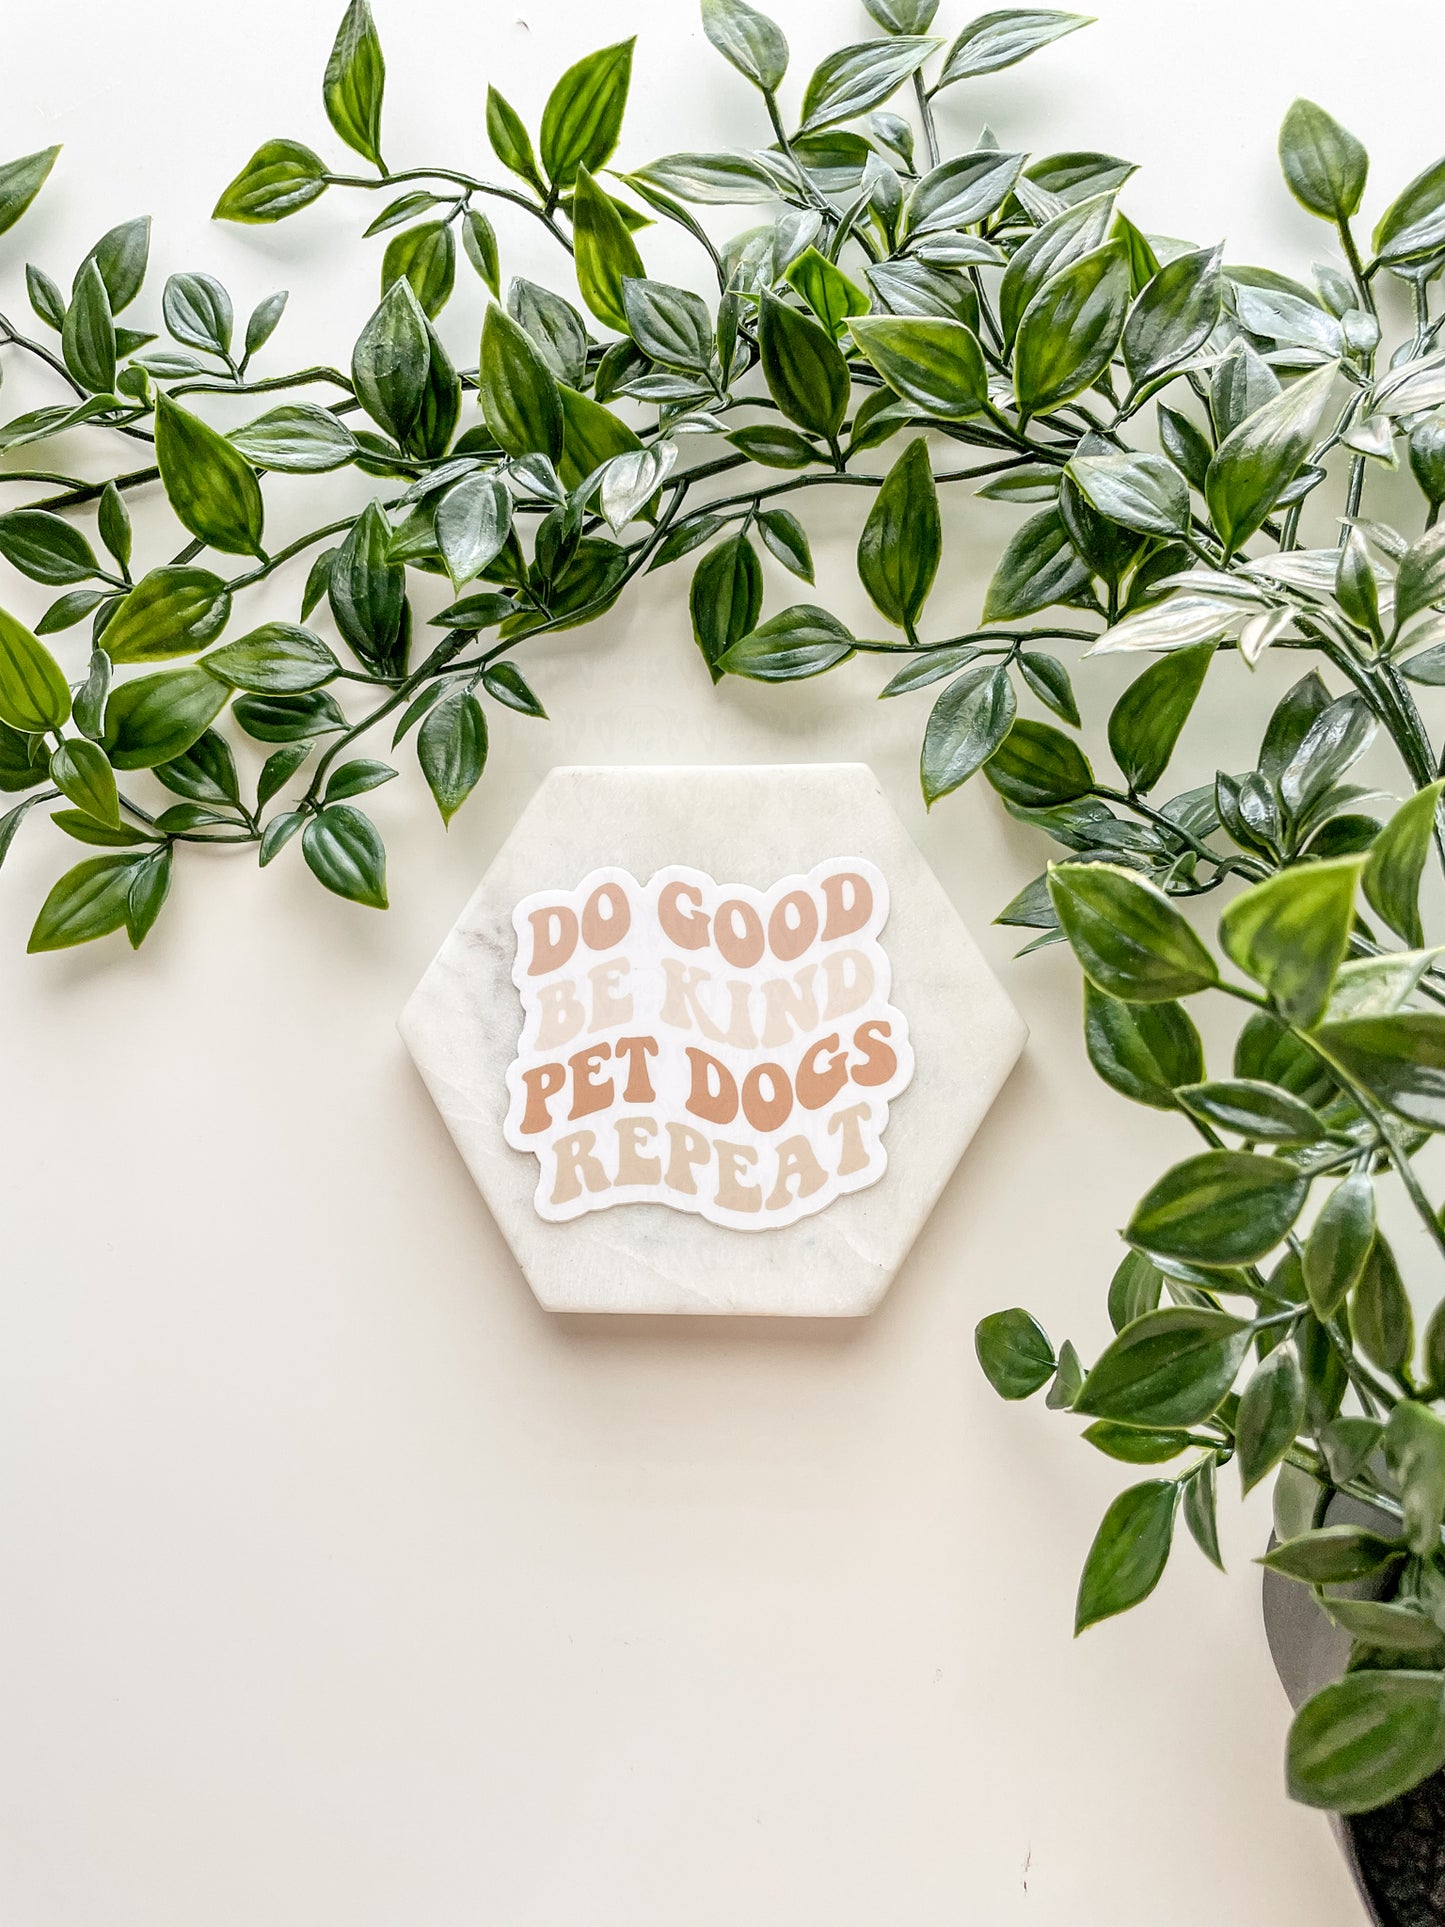 Do Good, Be Kind, Pet Dogs, Repeat Sticker